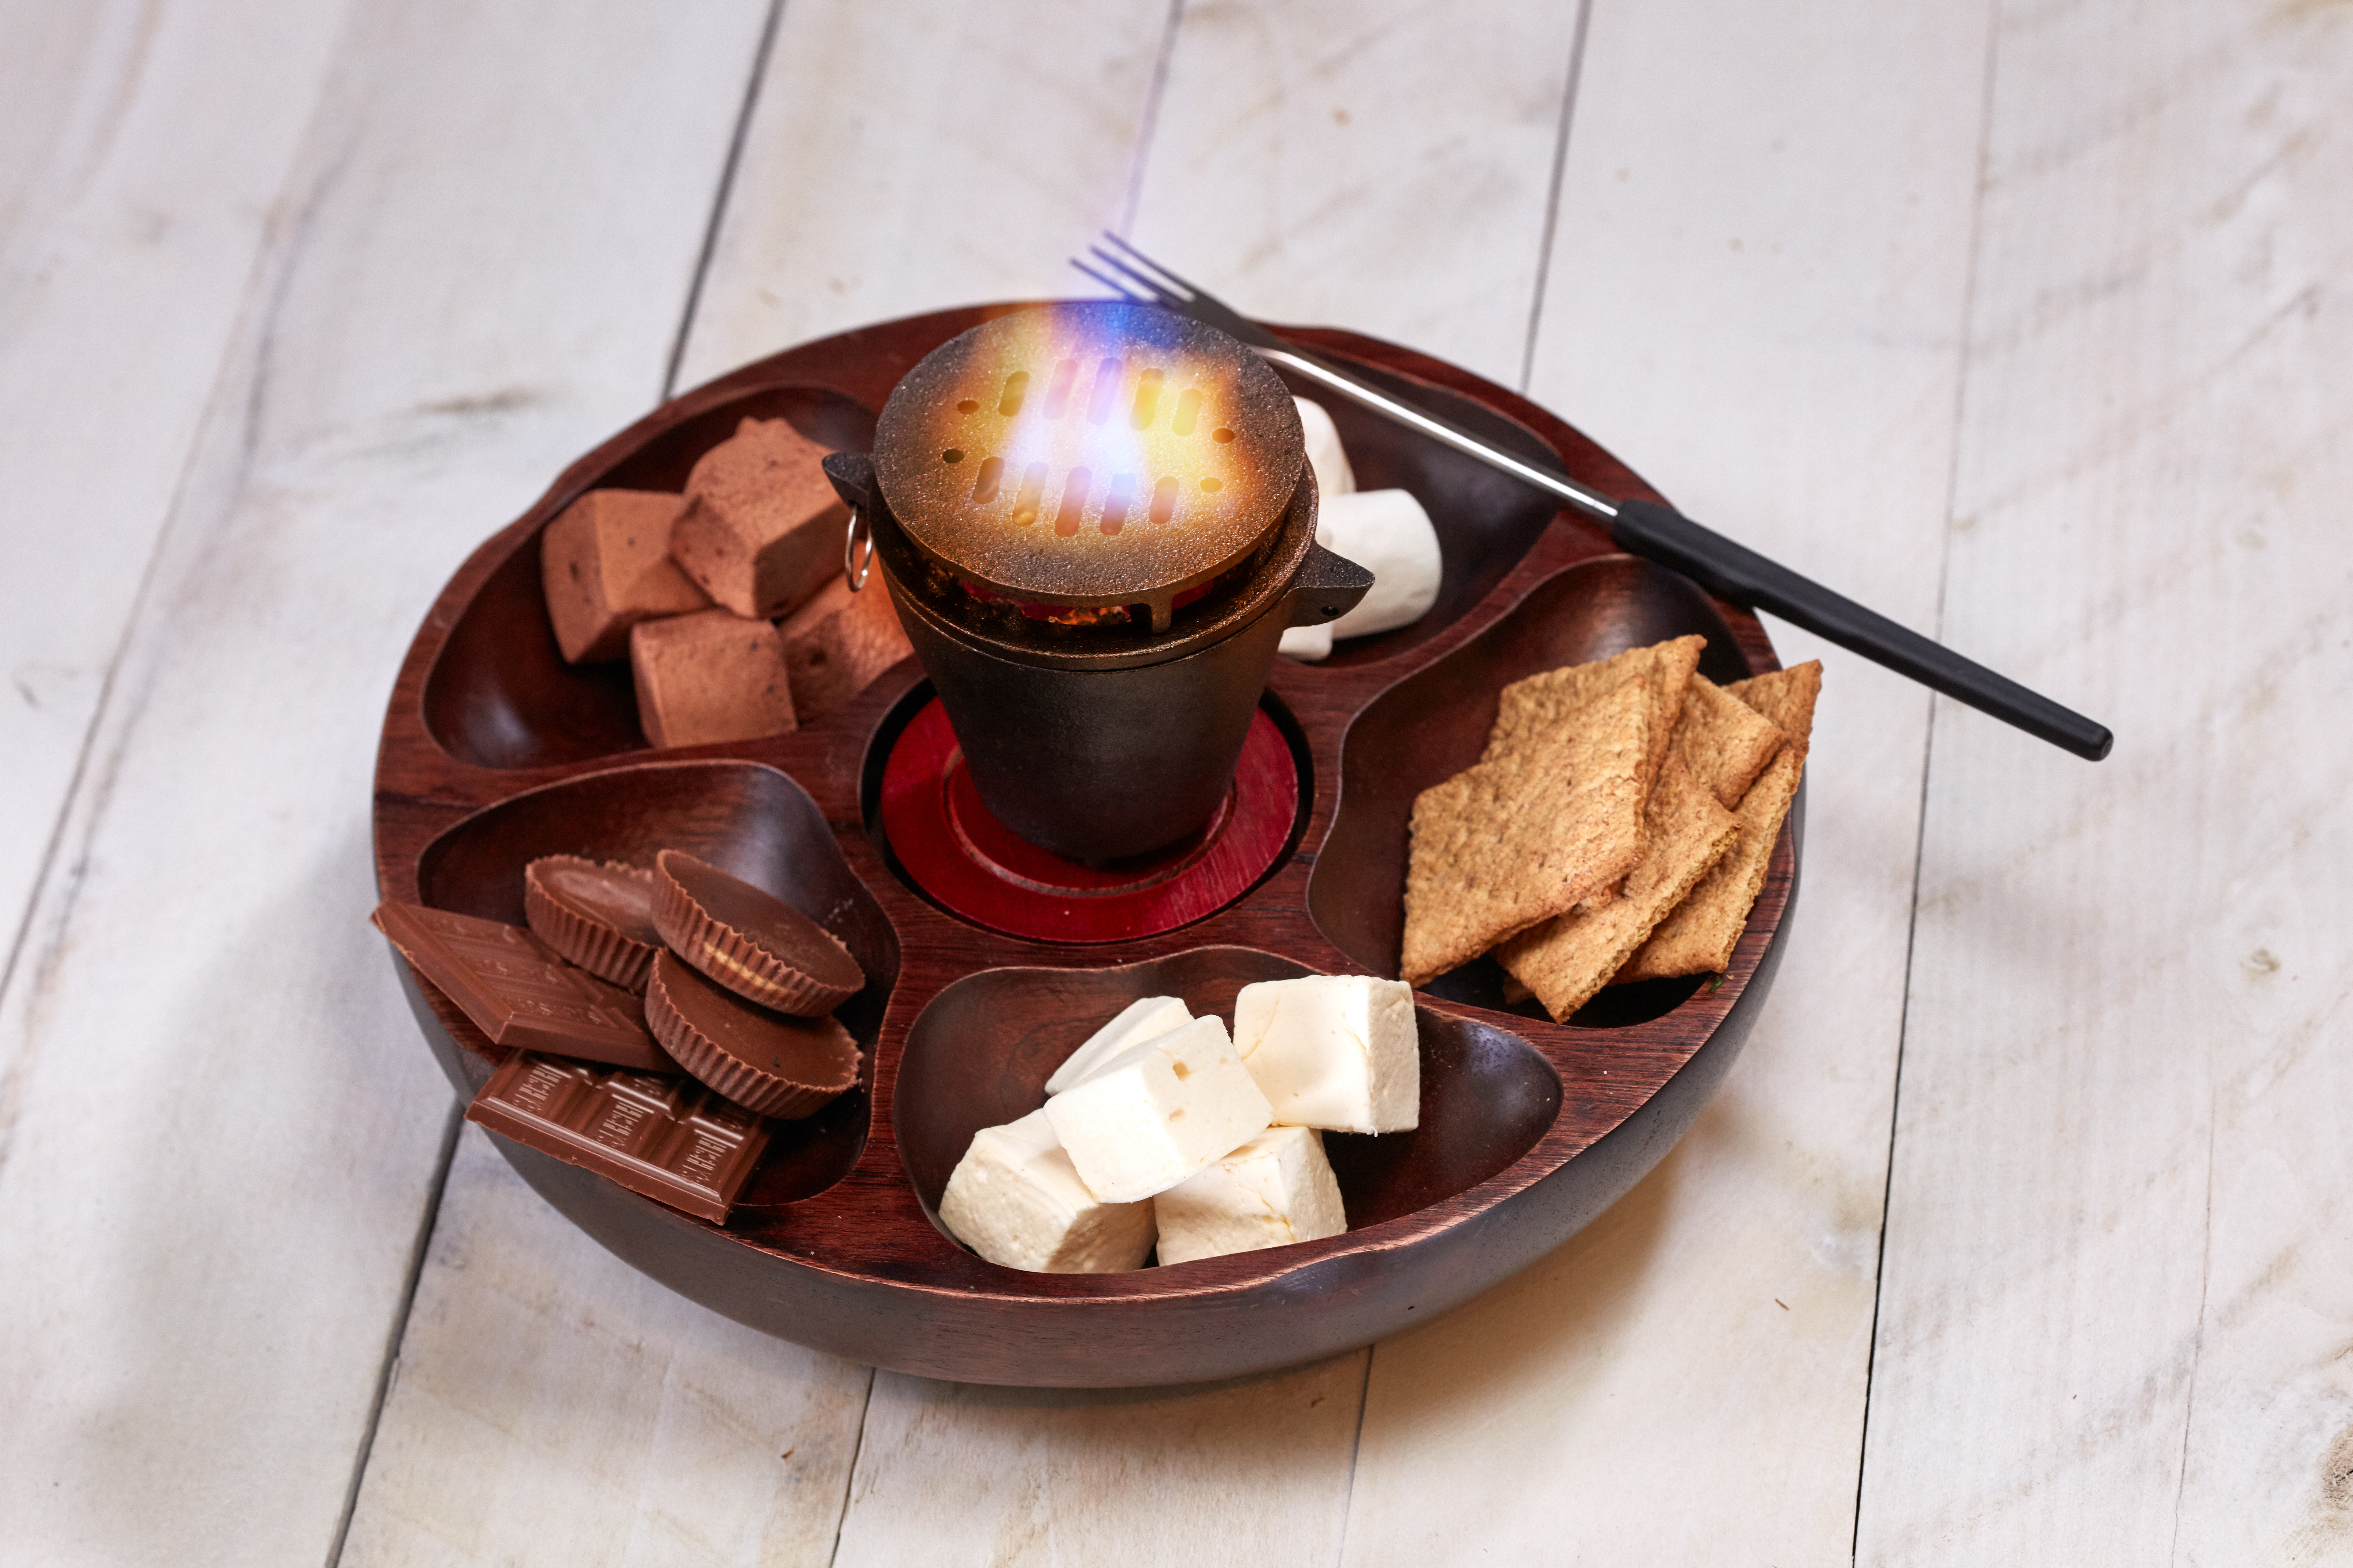 Bigfire encourages guests to get involved in the open-fire cooking experience, providing a kit to roast marshmallows and put together their own s’mores.